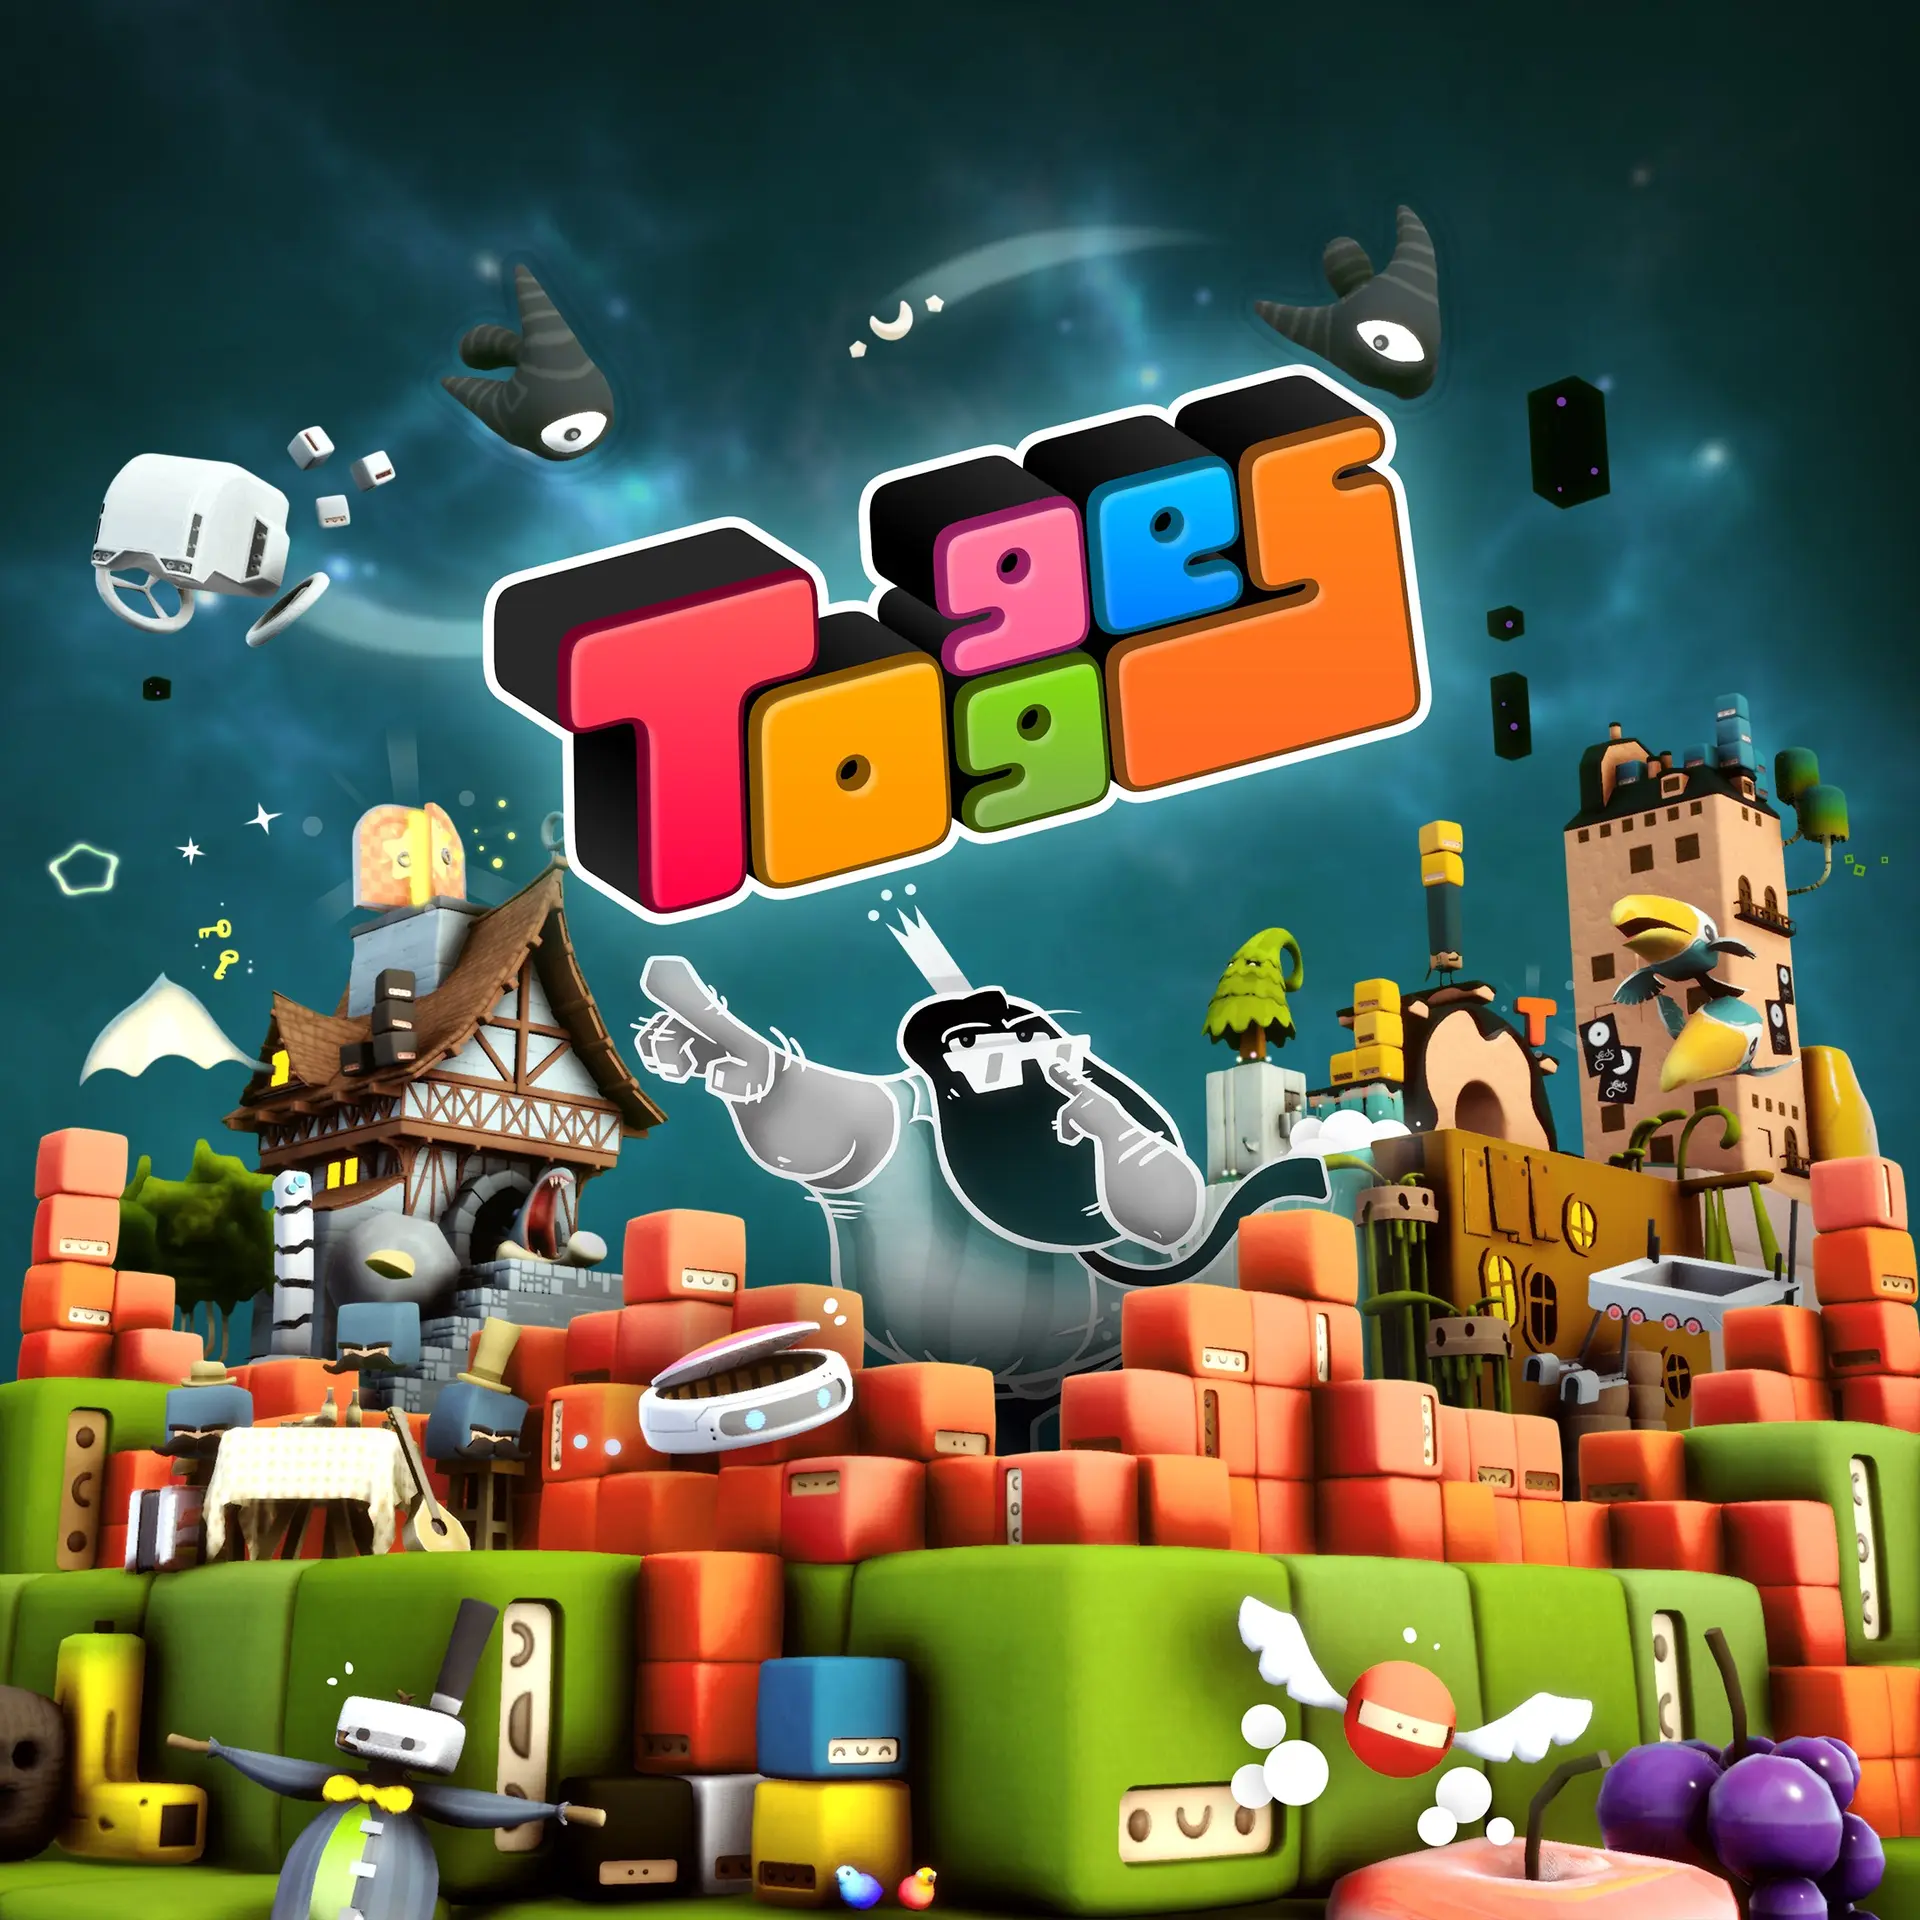 Togges (Xbox Games TR)